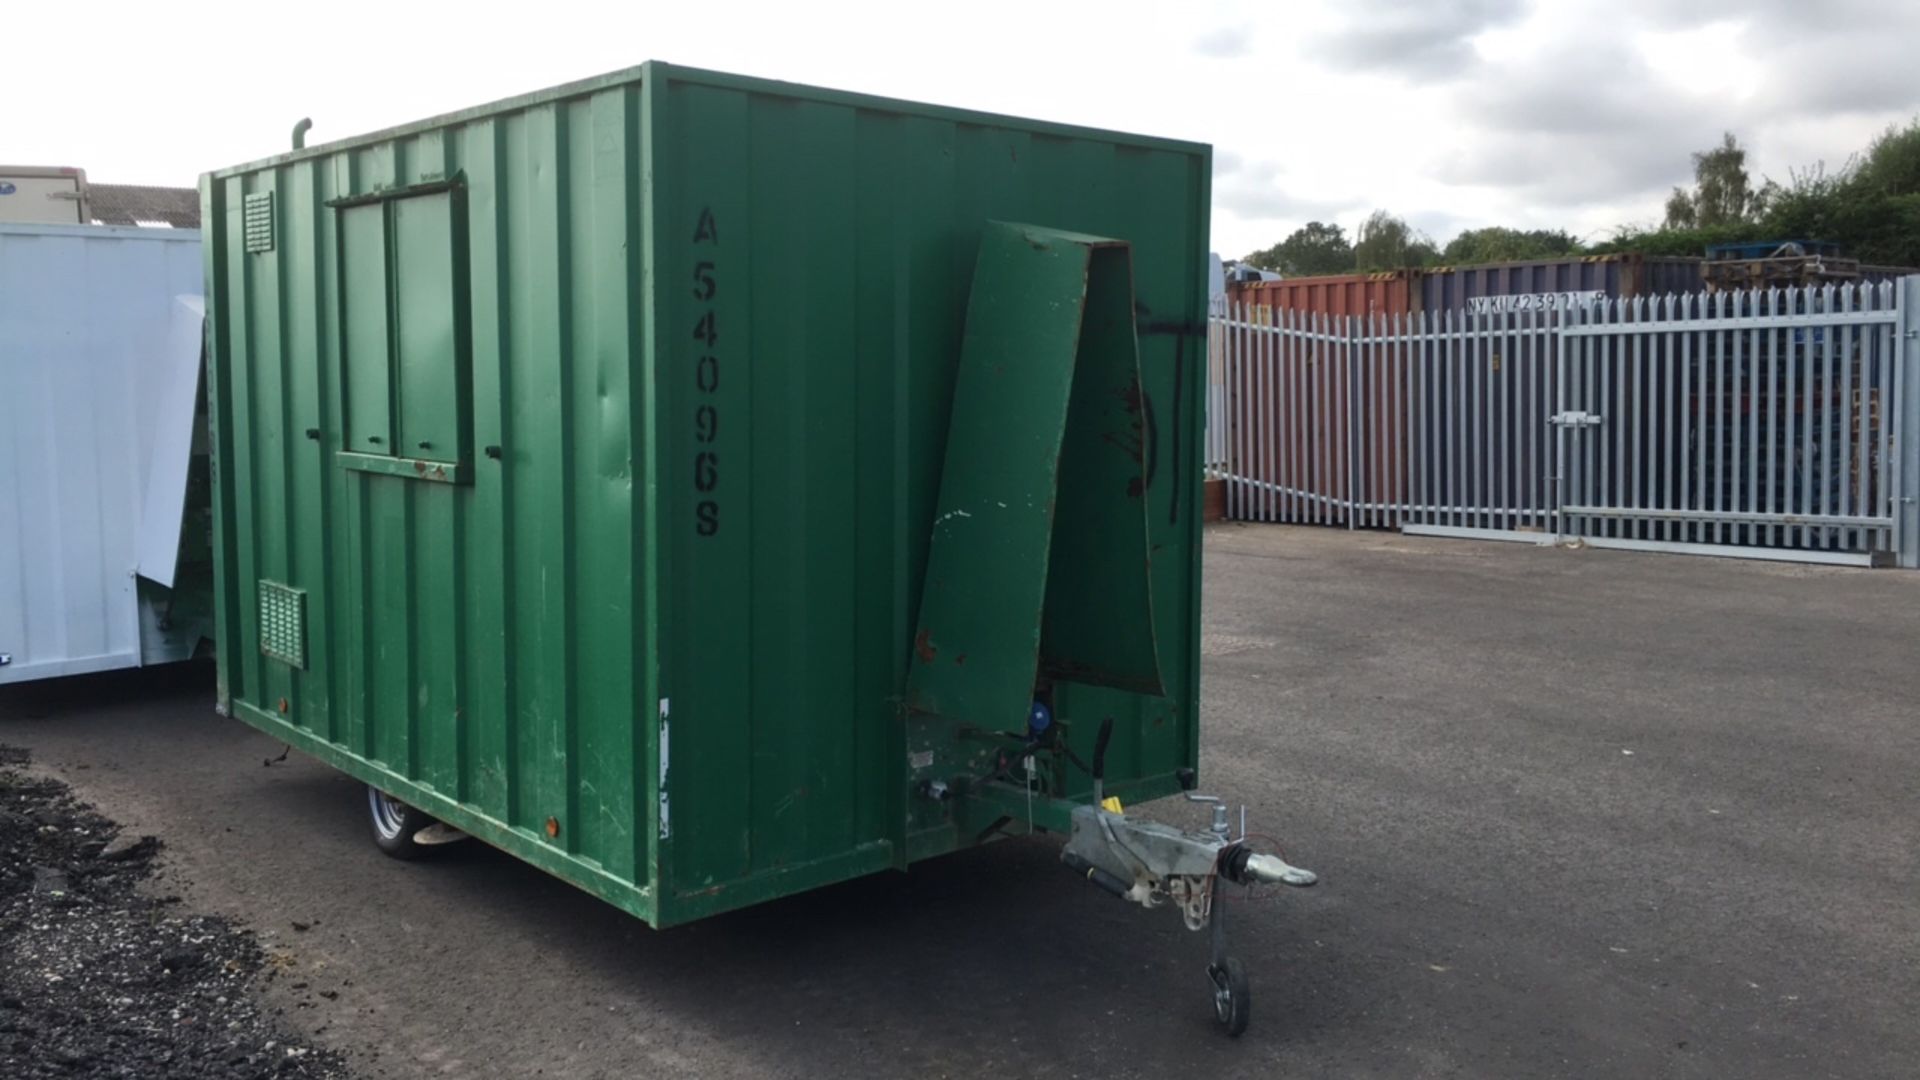 Mobile Welfare unit, Groundhog, GP360, 6 person (A540968) - Image 2 of 14